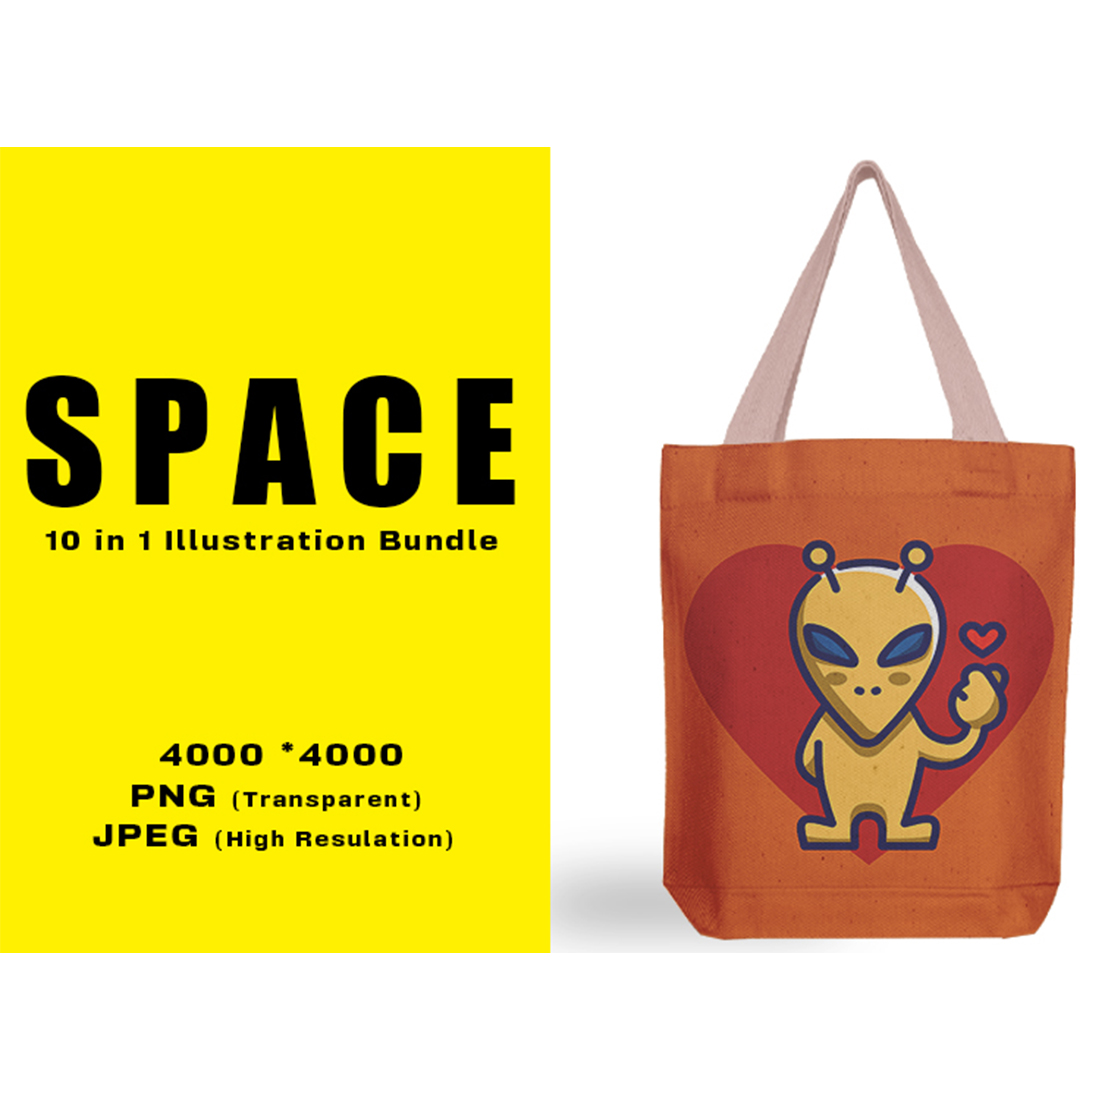 Image of a bag with a wonderful print on the theme of space